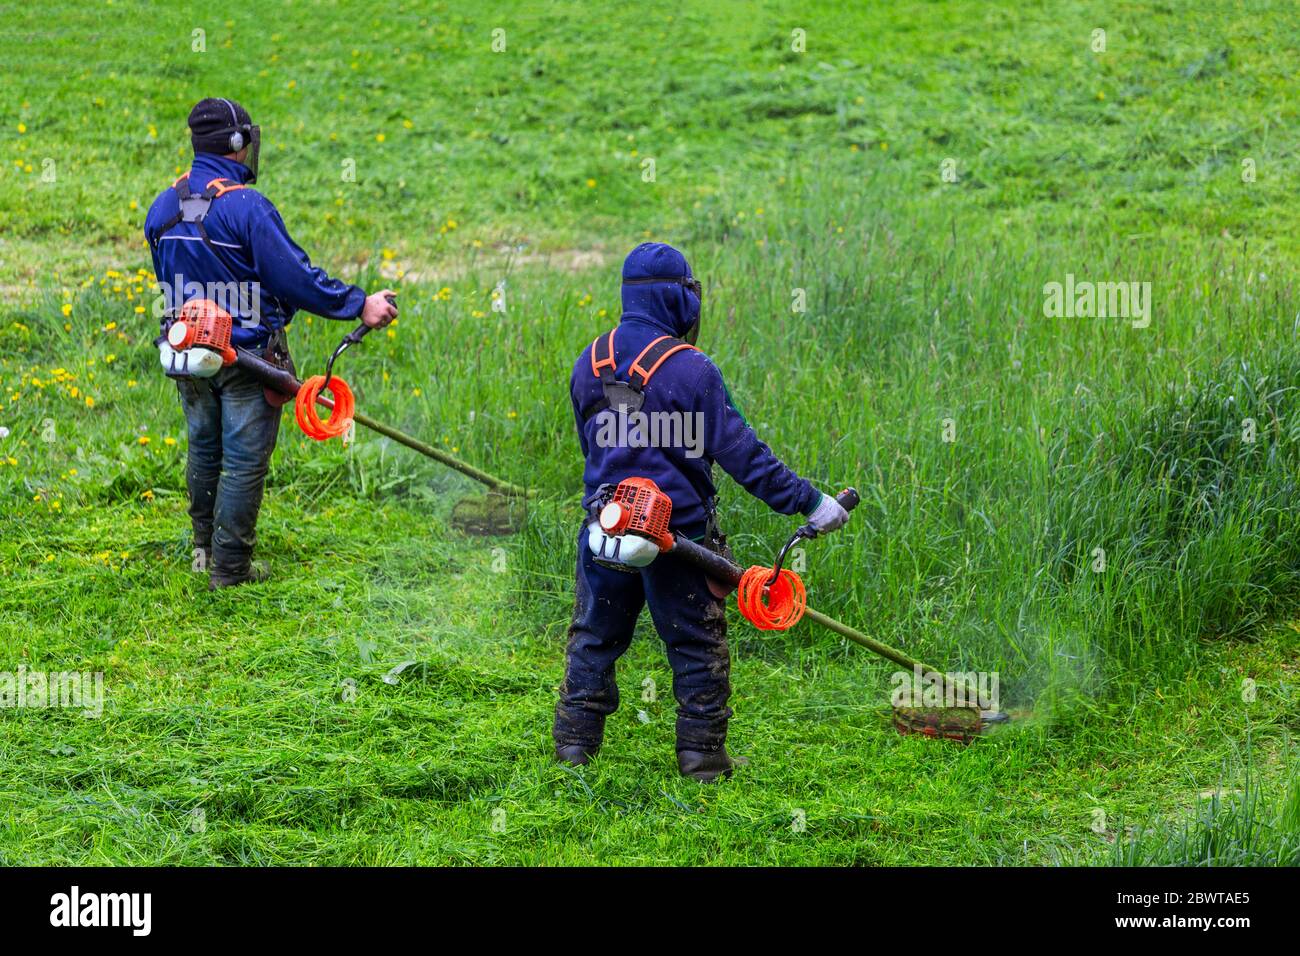 two lawnmower men with string trimmer and face mask trimmong grass - close-up Stock Photo